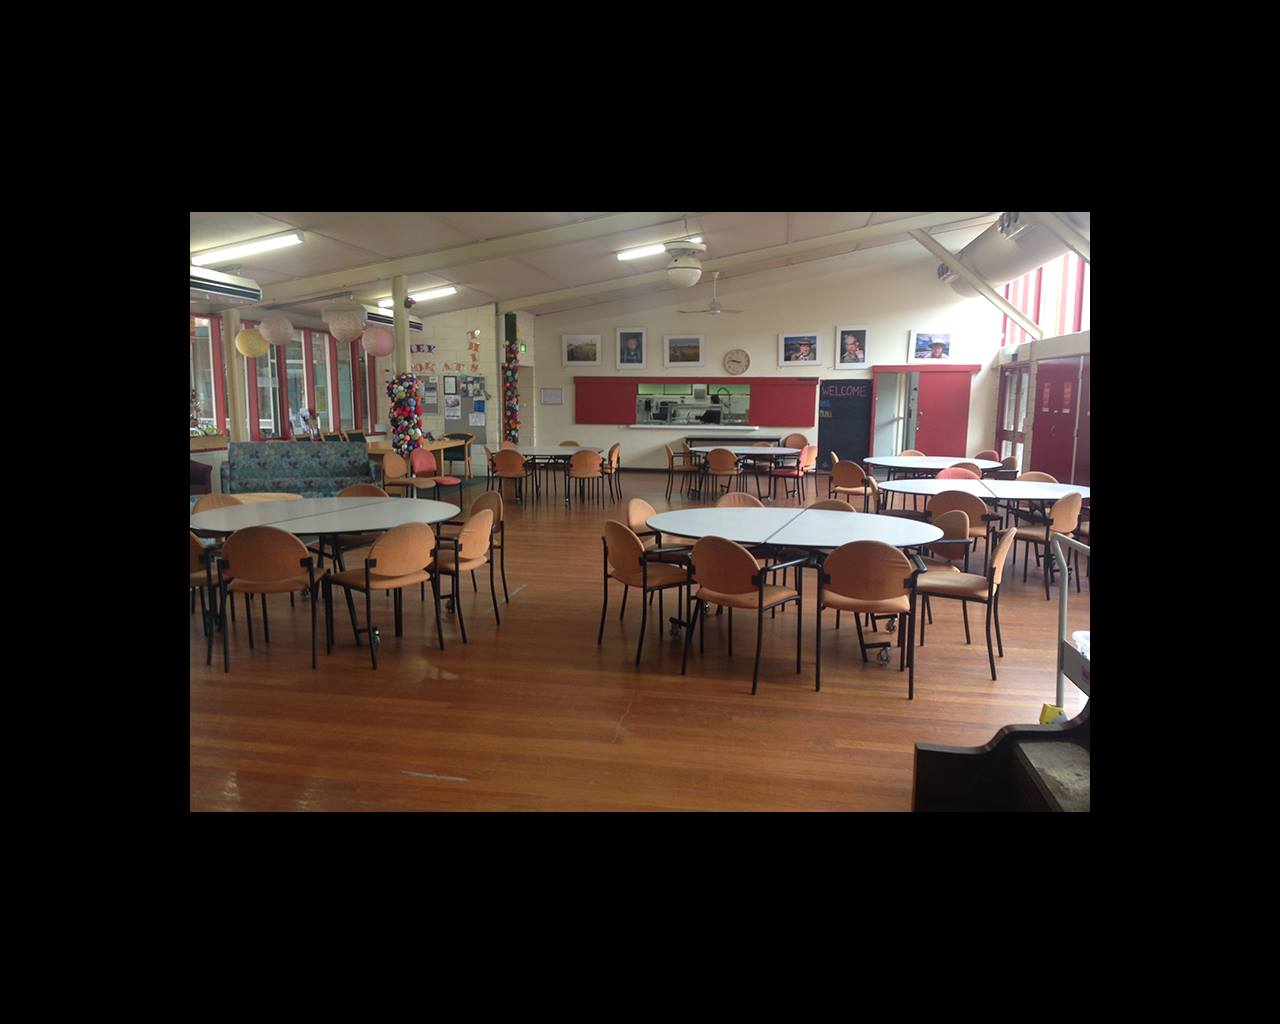 photo inside the Collingwood Senior Citizens Centre showing round tables and chairs